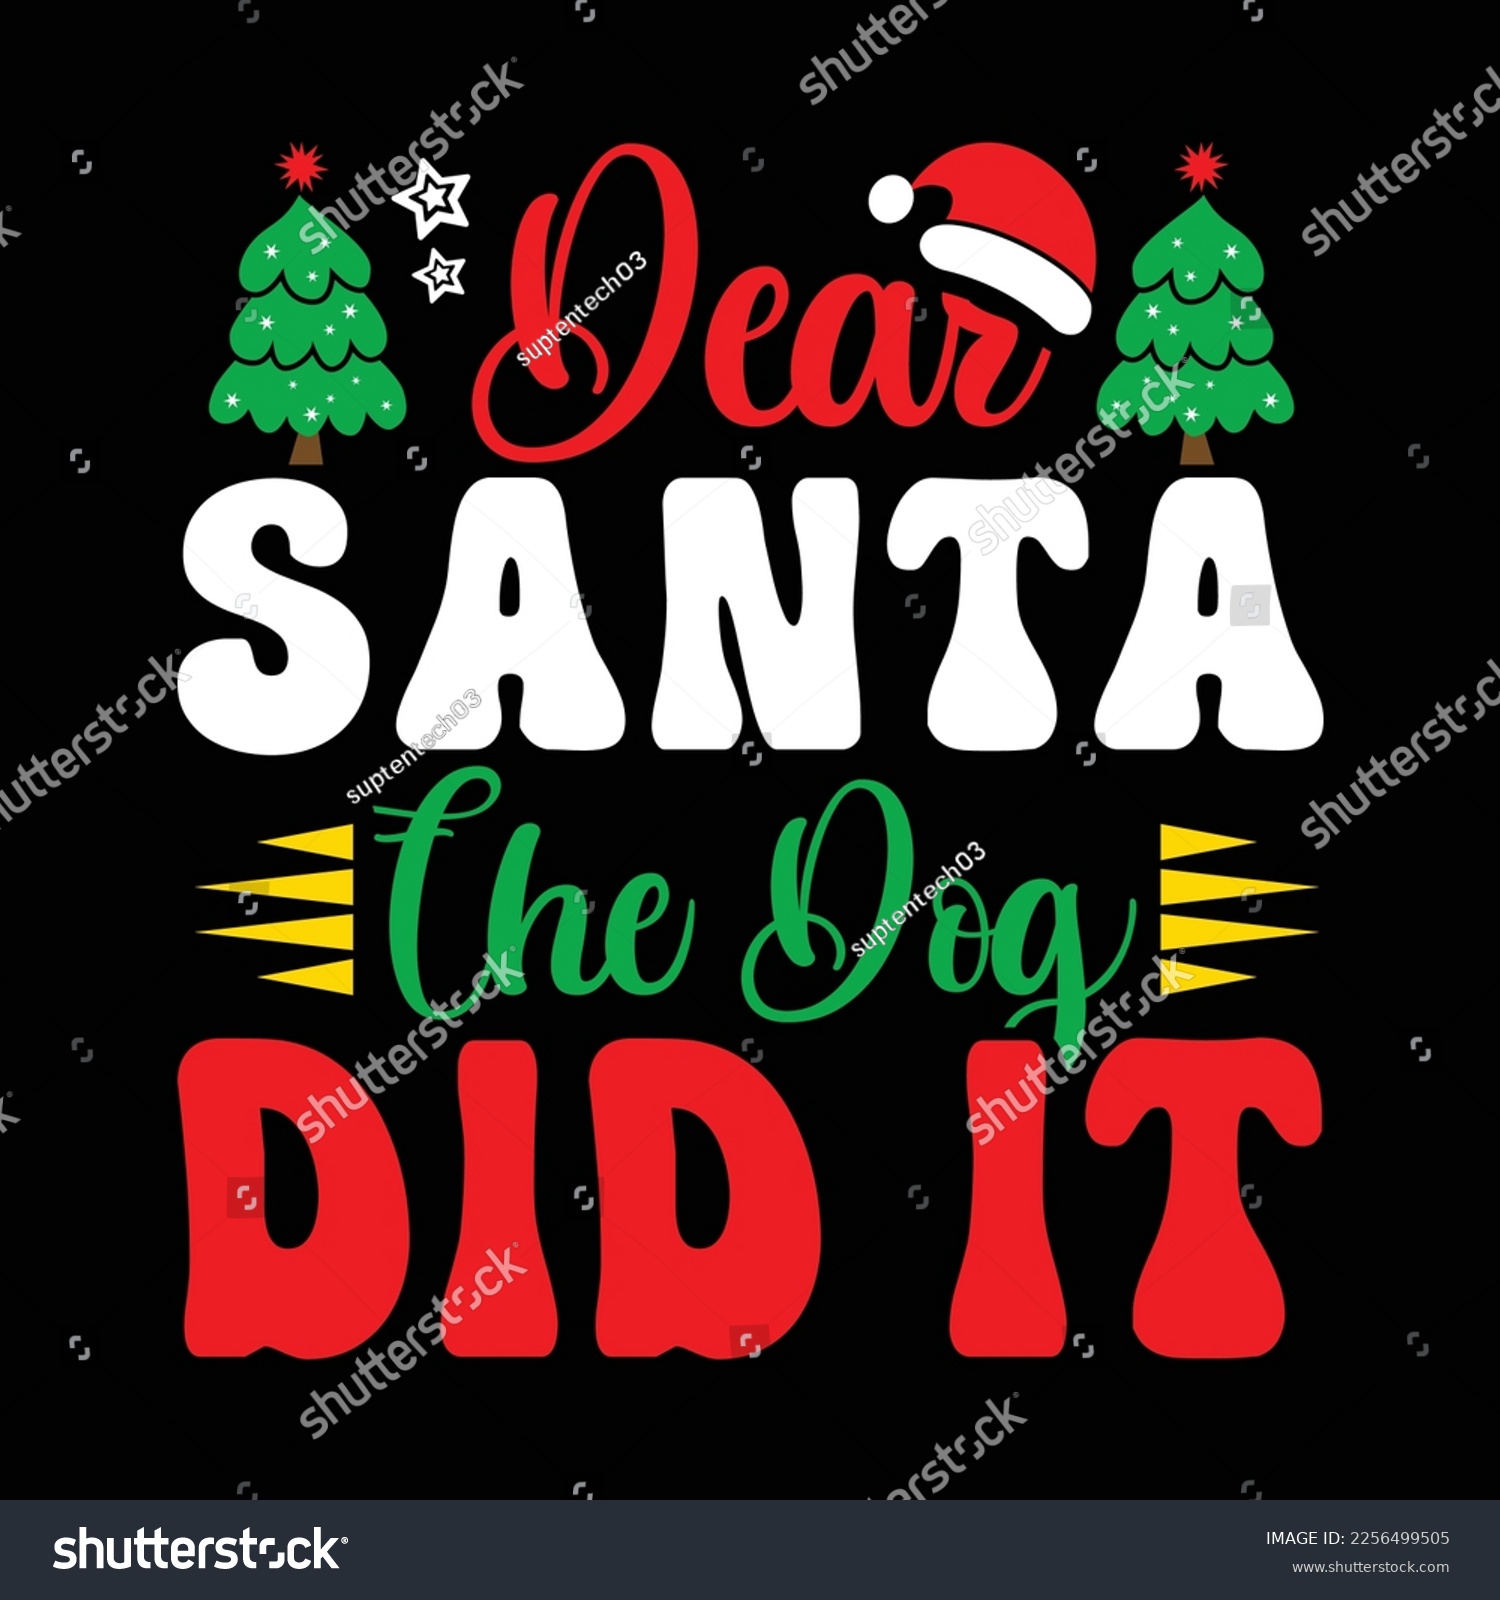 SVG of Dear Santa Che Dog Did it, Merry Christmas shirts Print Template, Xmas Ugly Snow Santa Clouse New Year Holiday Candy Santa Hat vector illustration for Christmas hand lettered svg